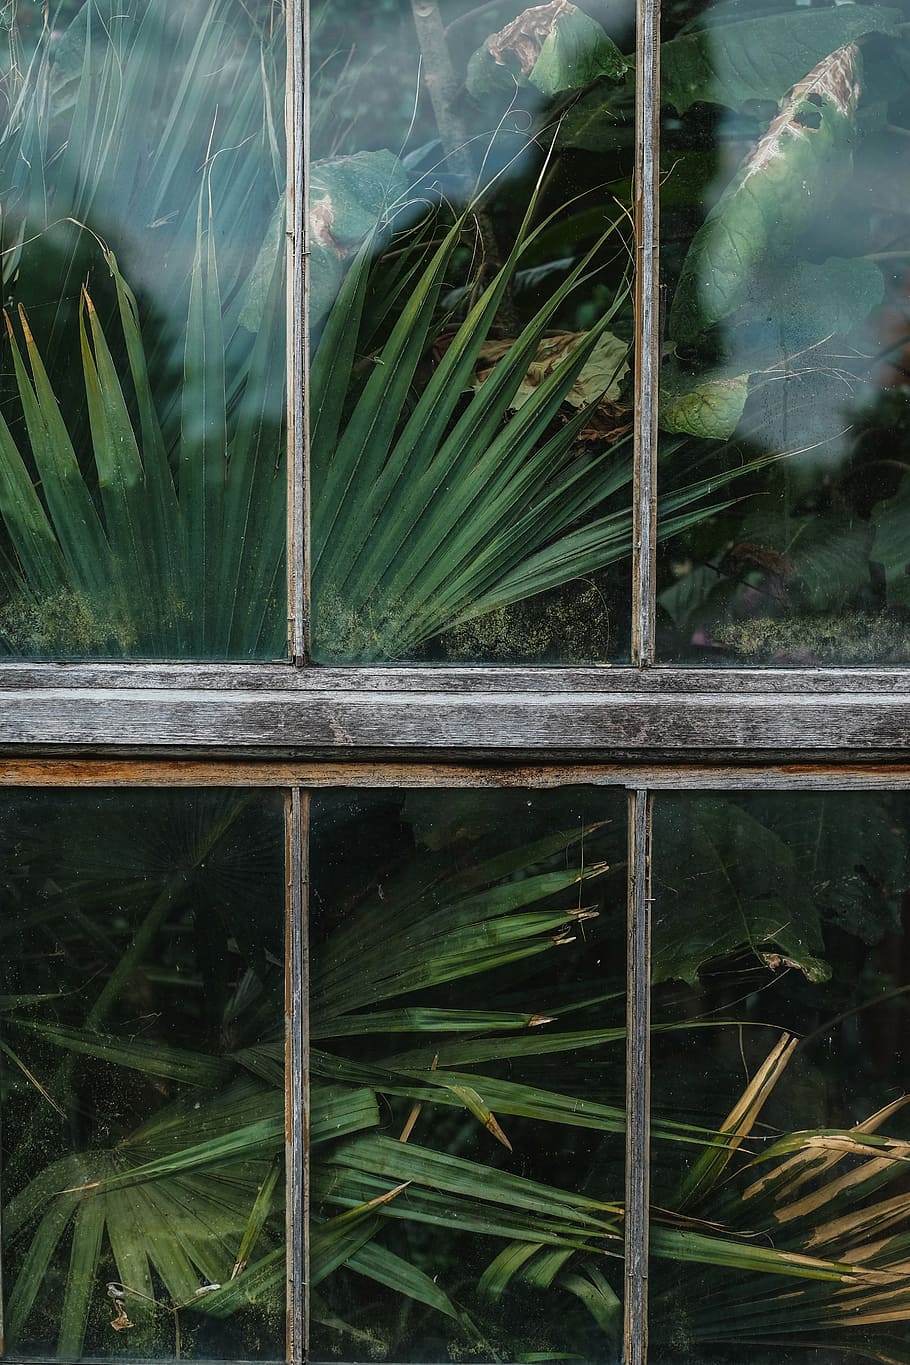 close-up, sago palm, window, shield, glass, green, plants, nature, outside, plant